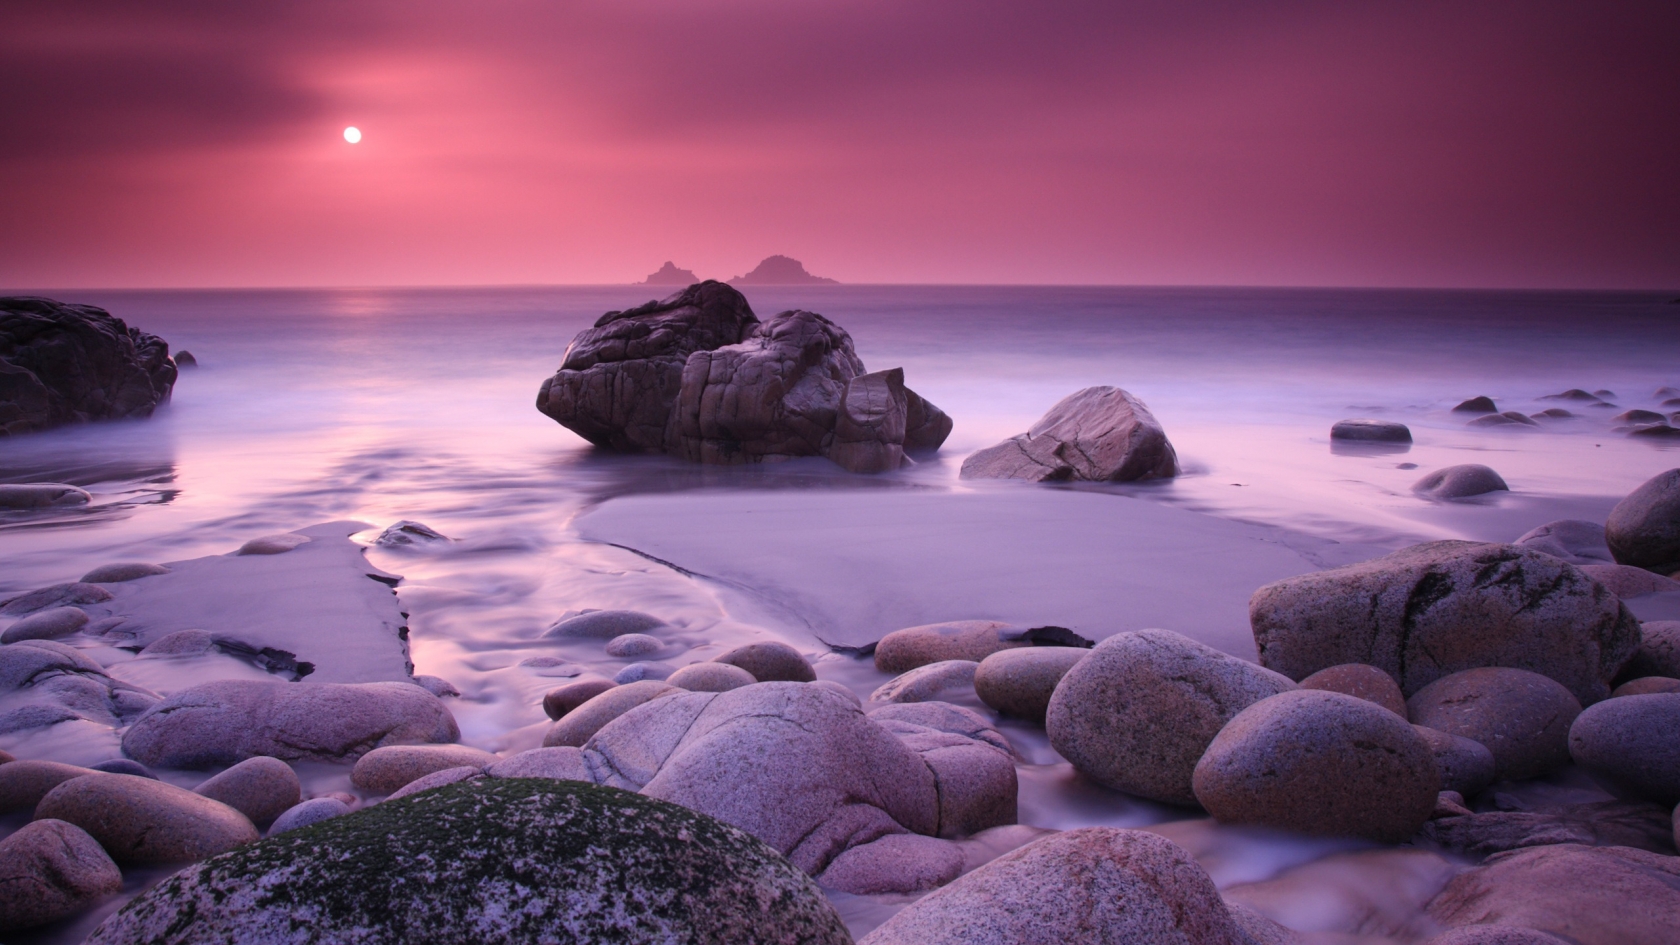 Pink Haze and Stones for 1680 x 945 HDTV resolution